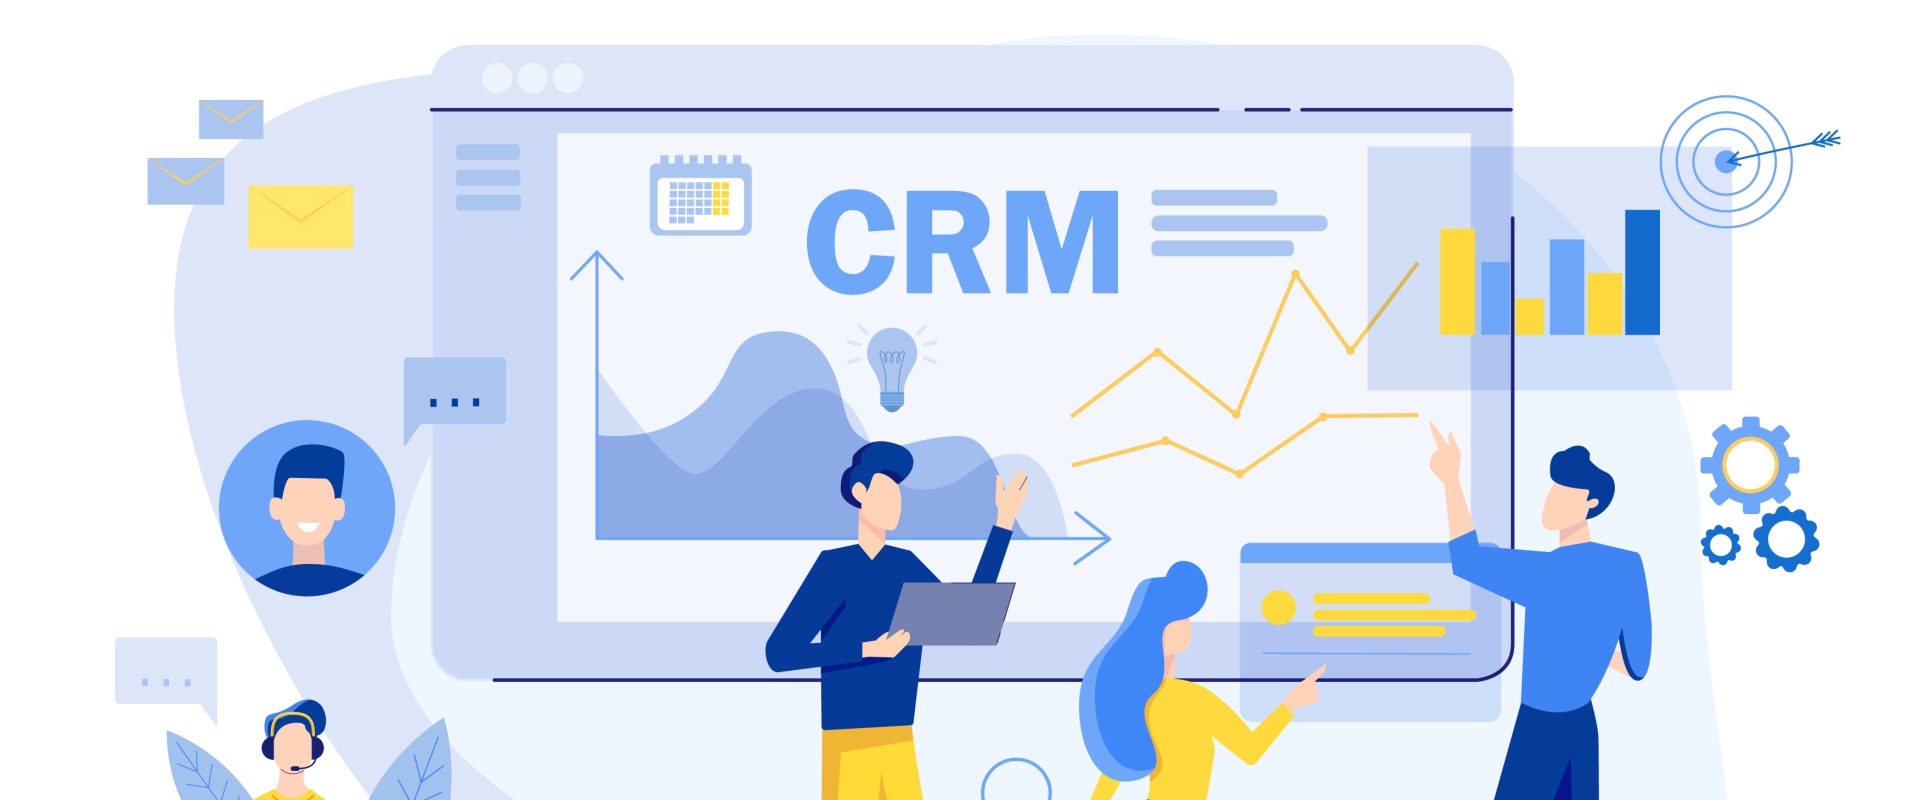 Predicting Future Sales and Revenue: How to Optimize Your CRM Strategy